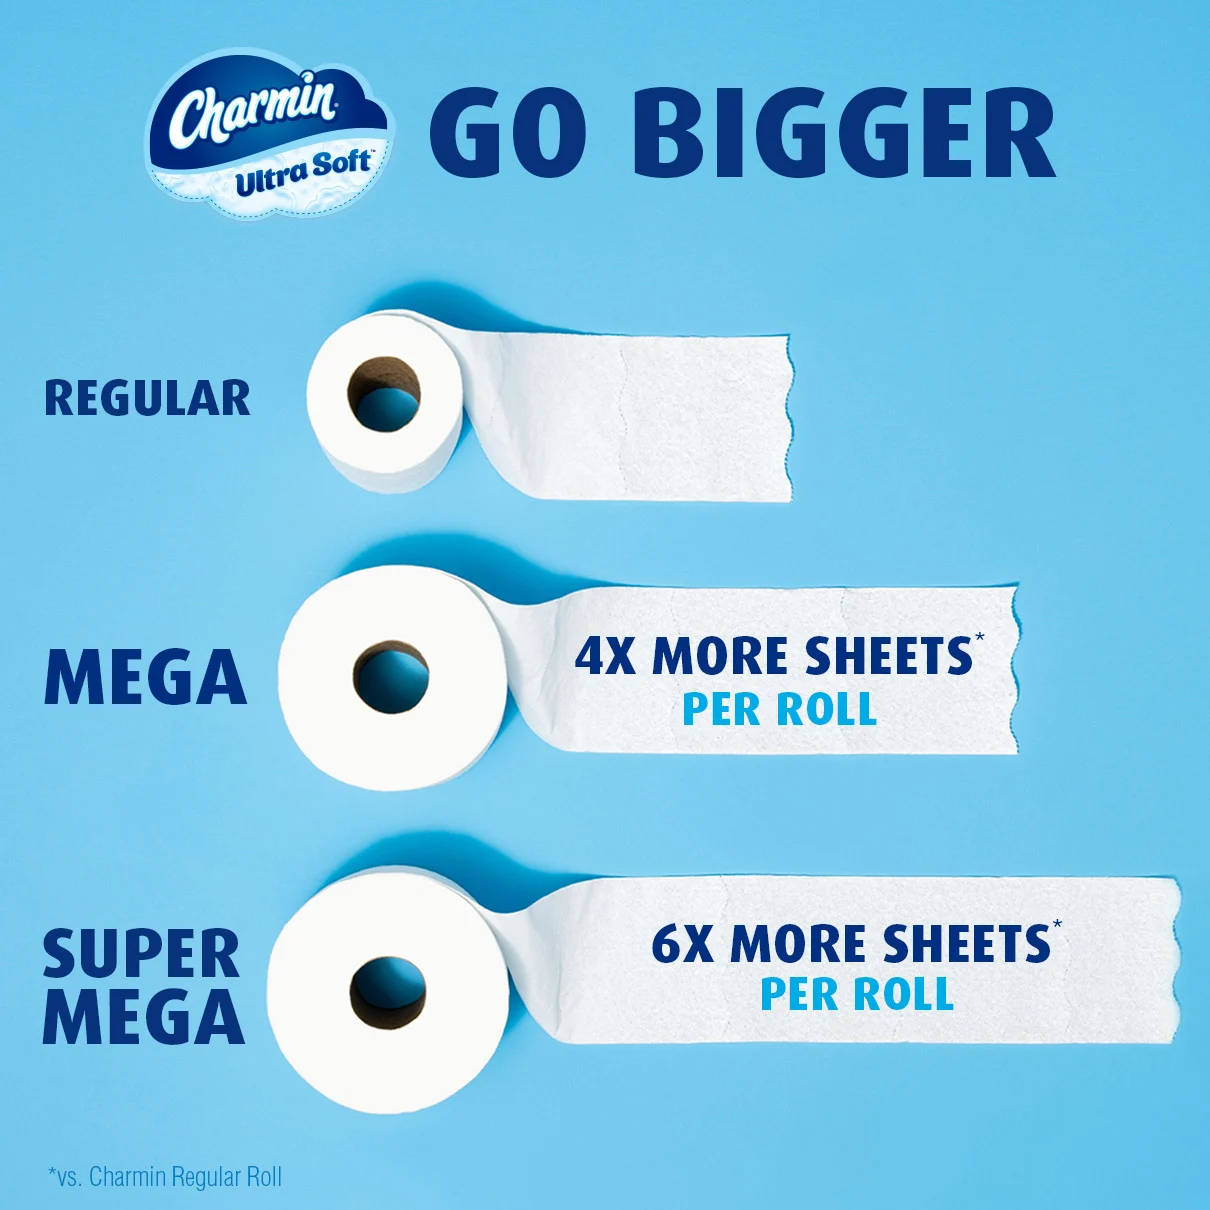 2x more absorbing soft toilet paper 3